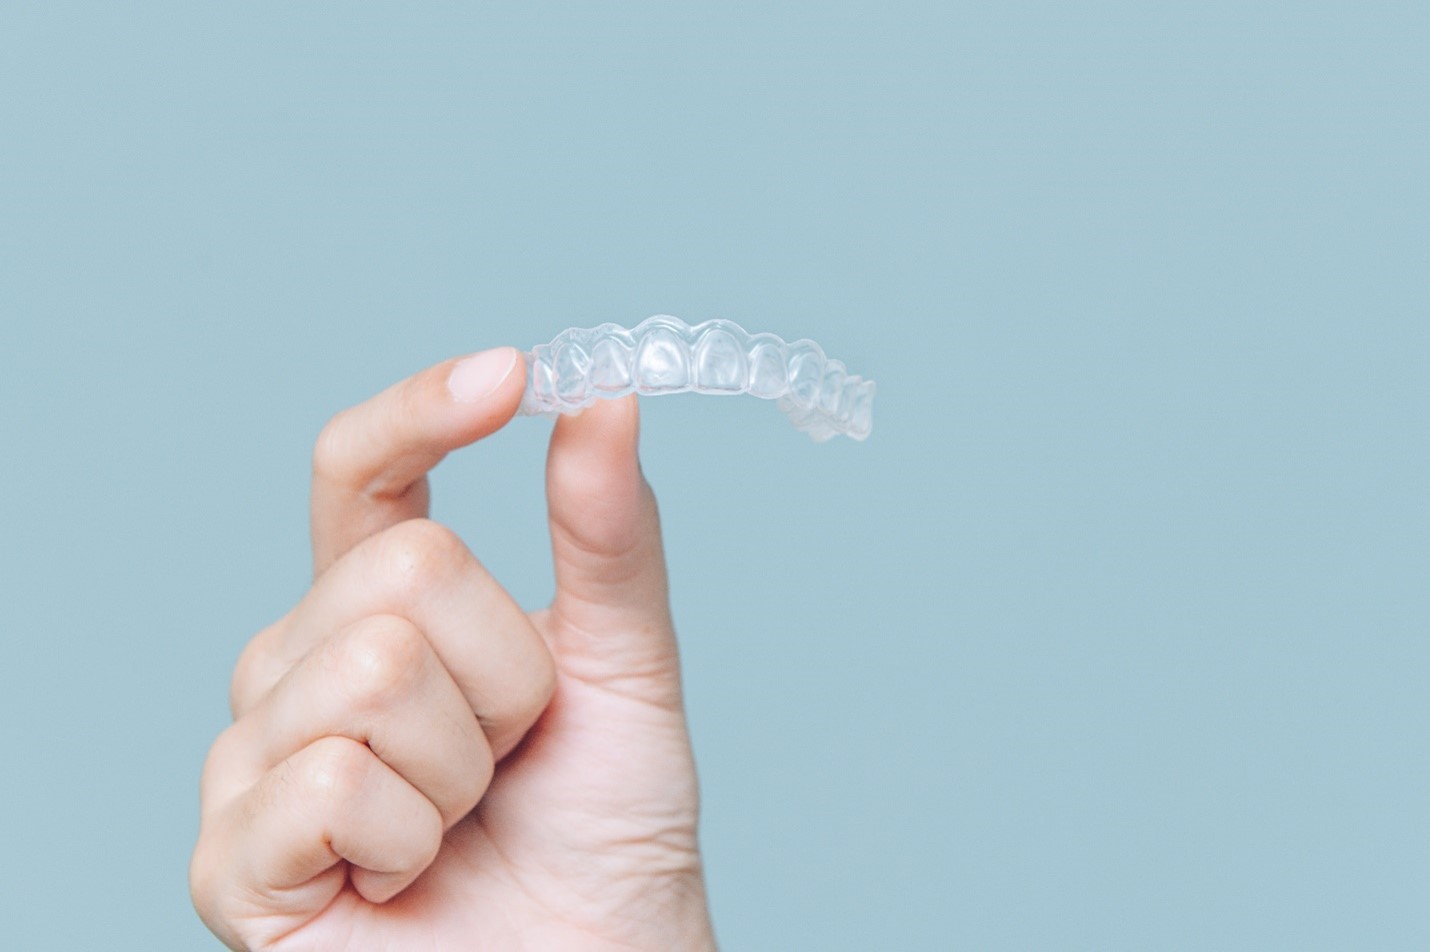 person’s hand holding clear aligner